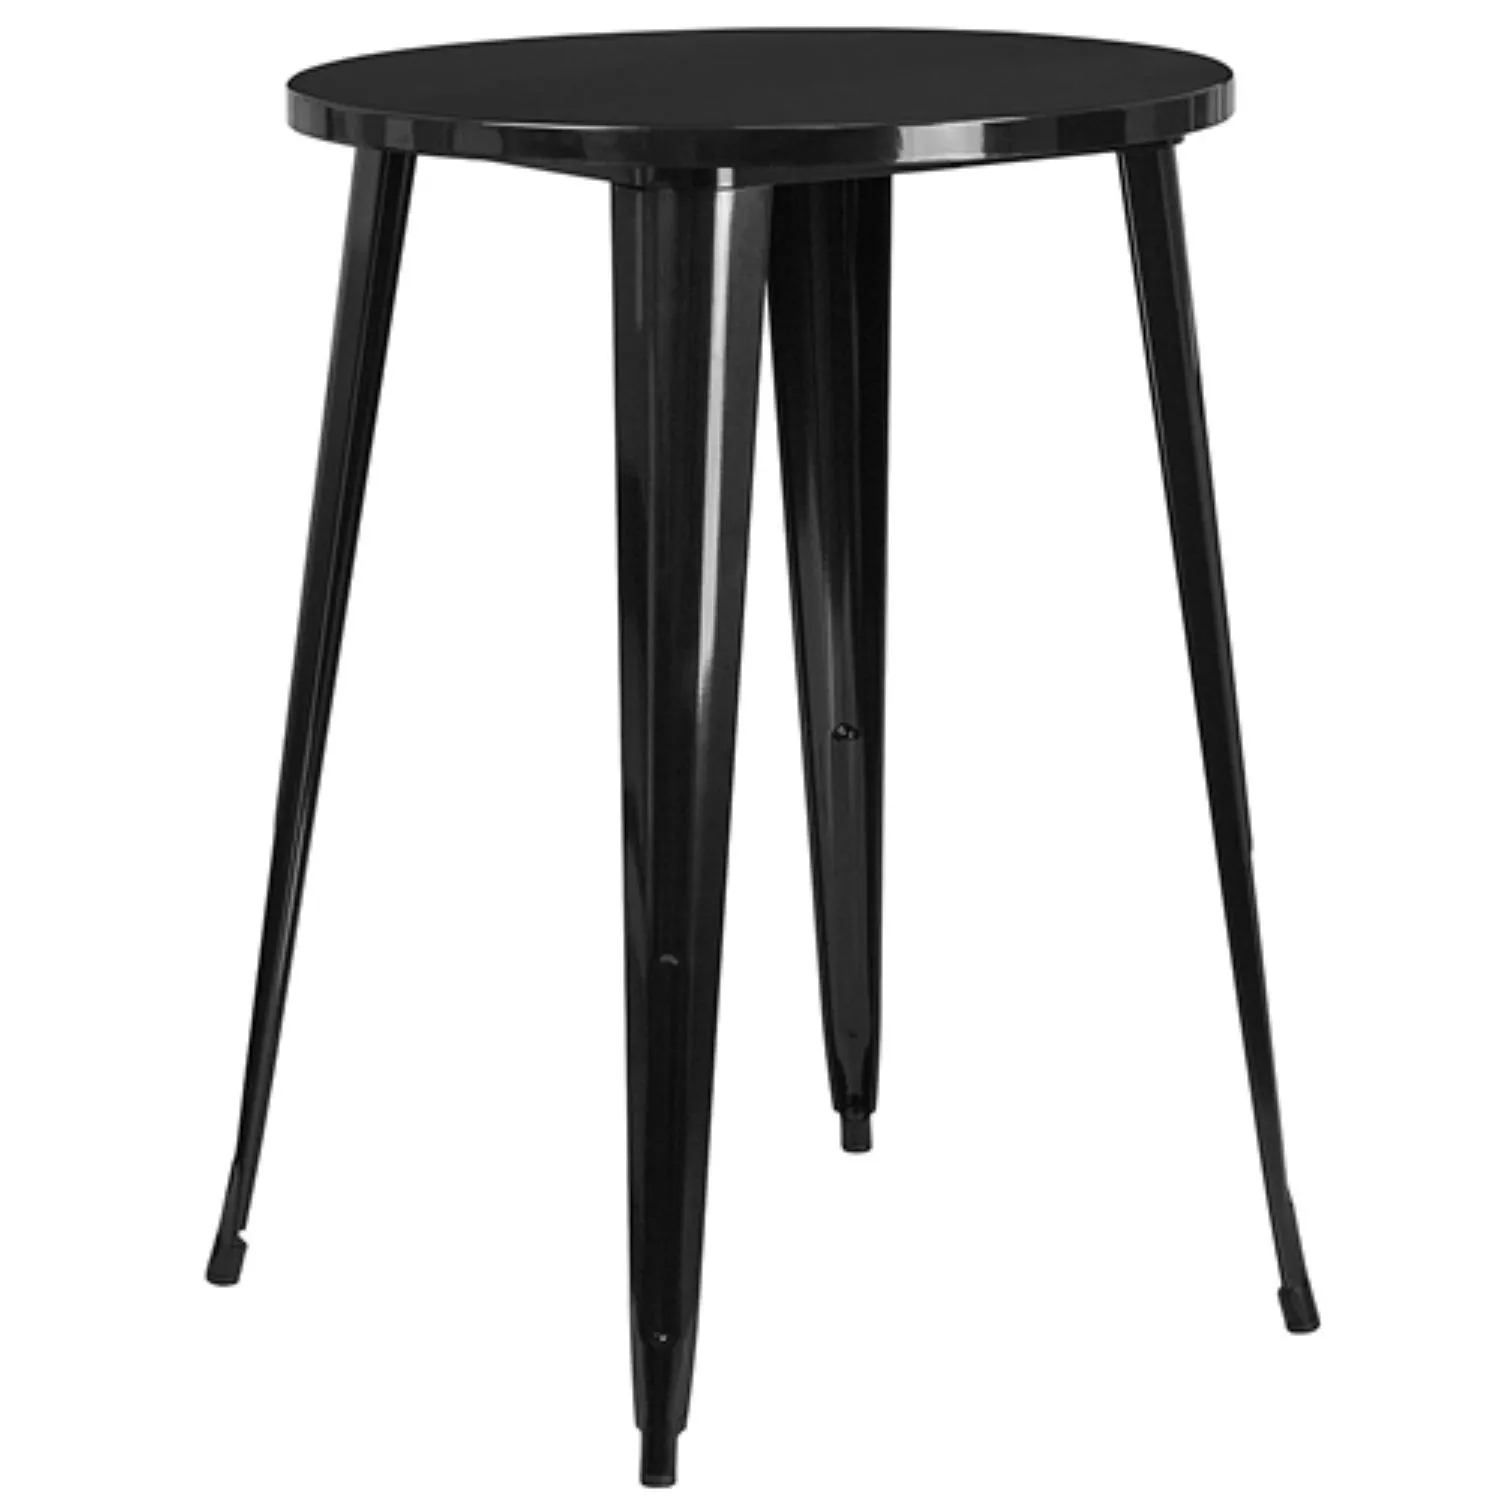 Hivvago Modern 30 inch Outdoor Round Metal Cafe Bar Patio Table in Black